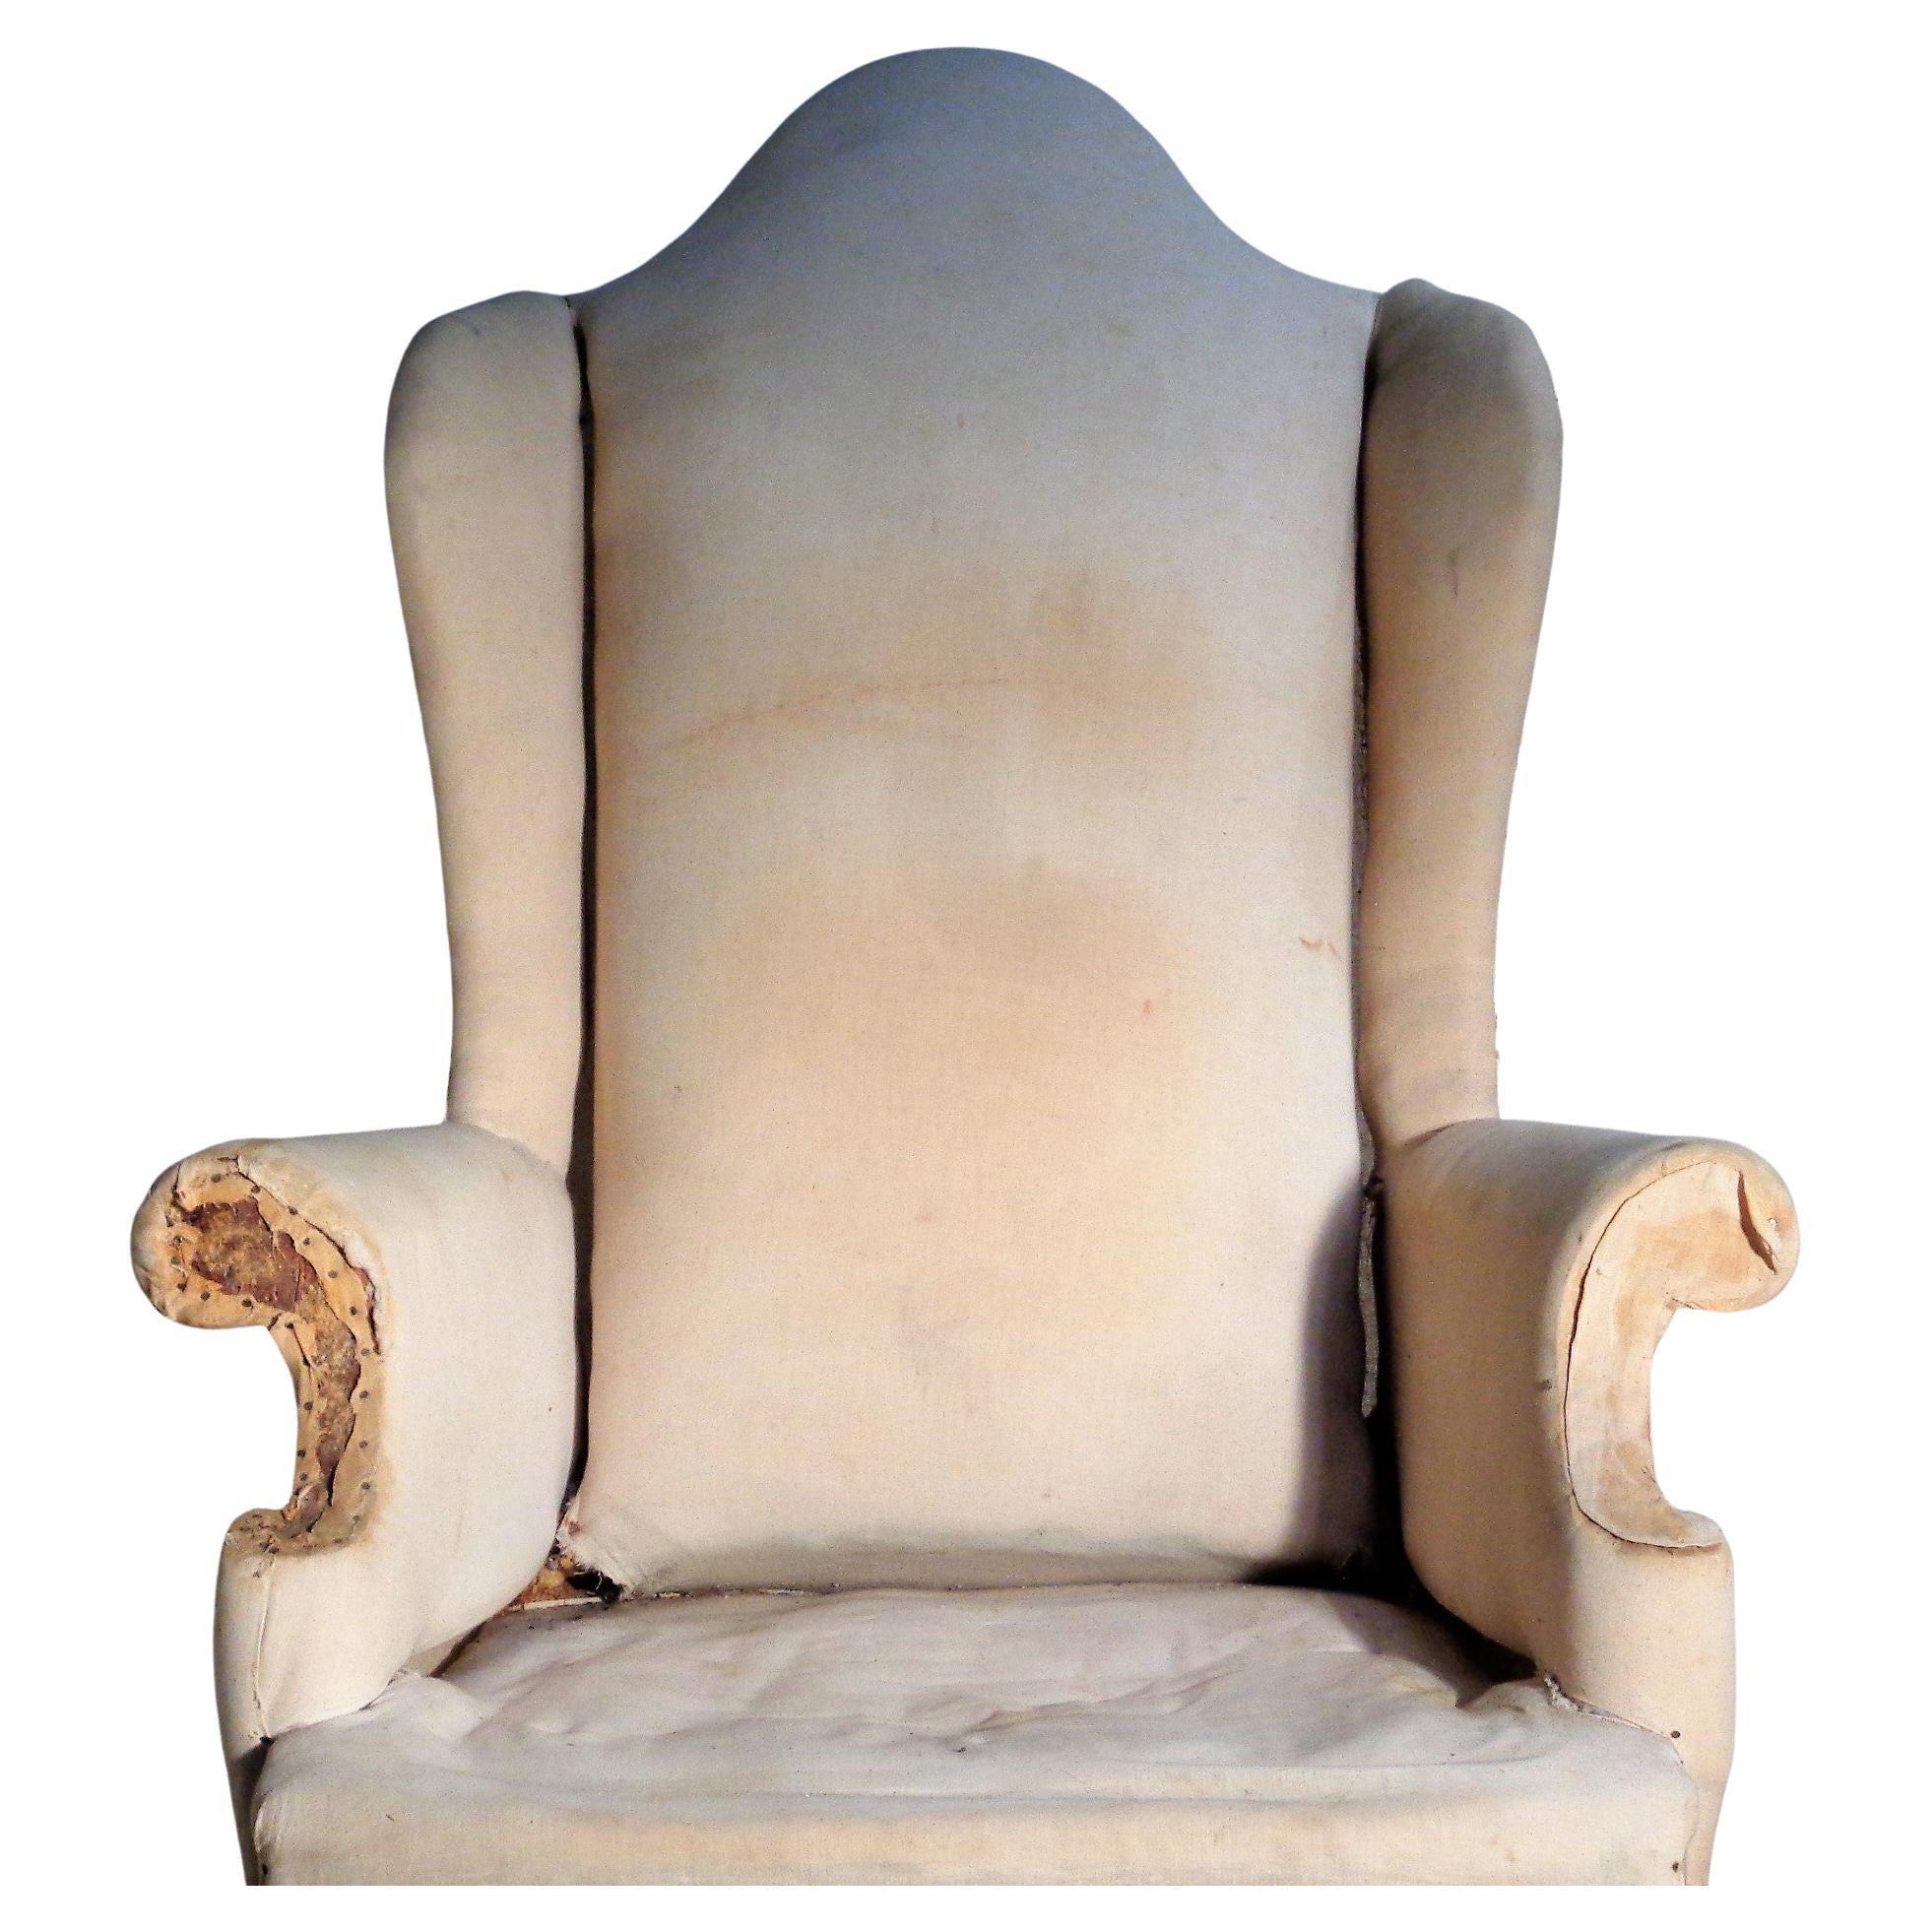 Antique Queen Anne style wing chair with beautifully shaped high back / rolled arms / carved front legs / interior wood framework. Chair has been stripped down to original muslin as shown in pictures. Circa 1900. Measures 52 1/2